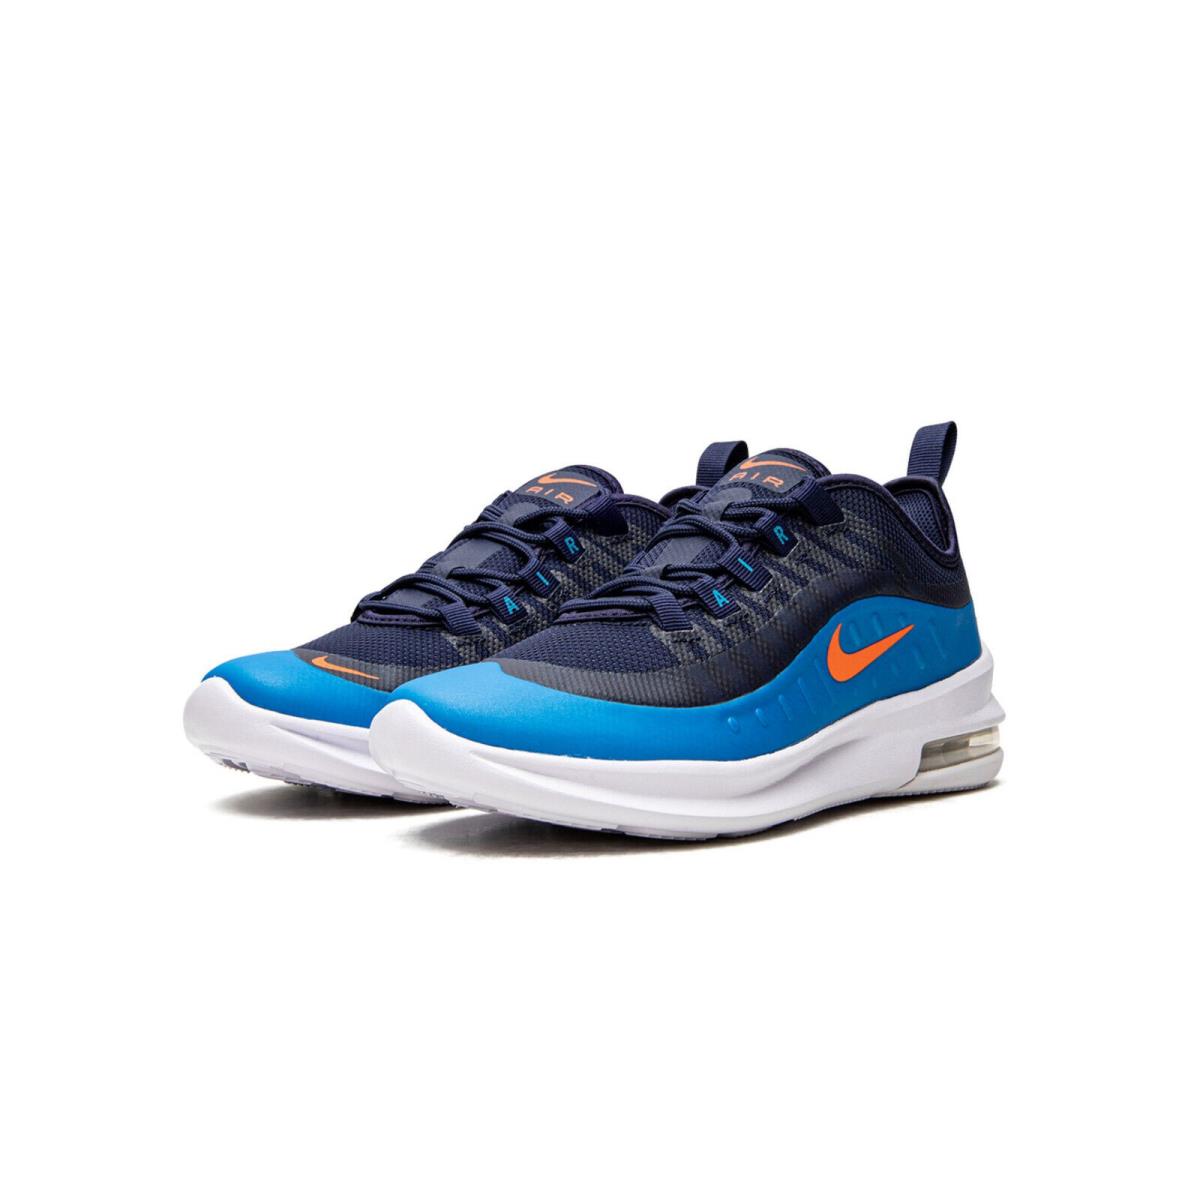 Nike Air Max Axis Navy Blue Running Shoes AH5222 402 - Size 6Y / 7.5 Womens - Multicolor